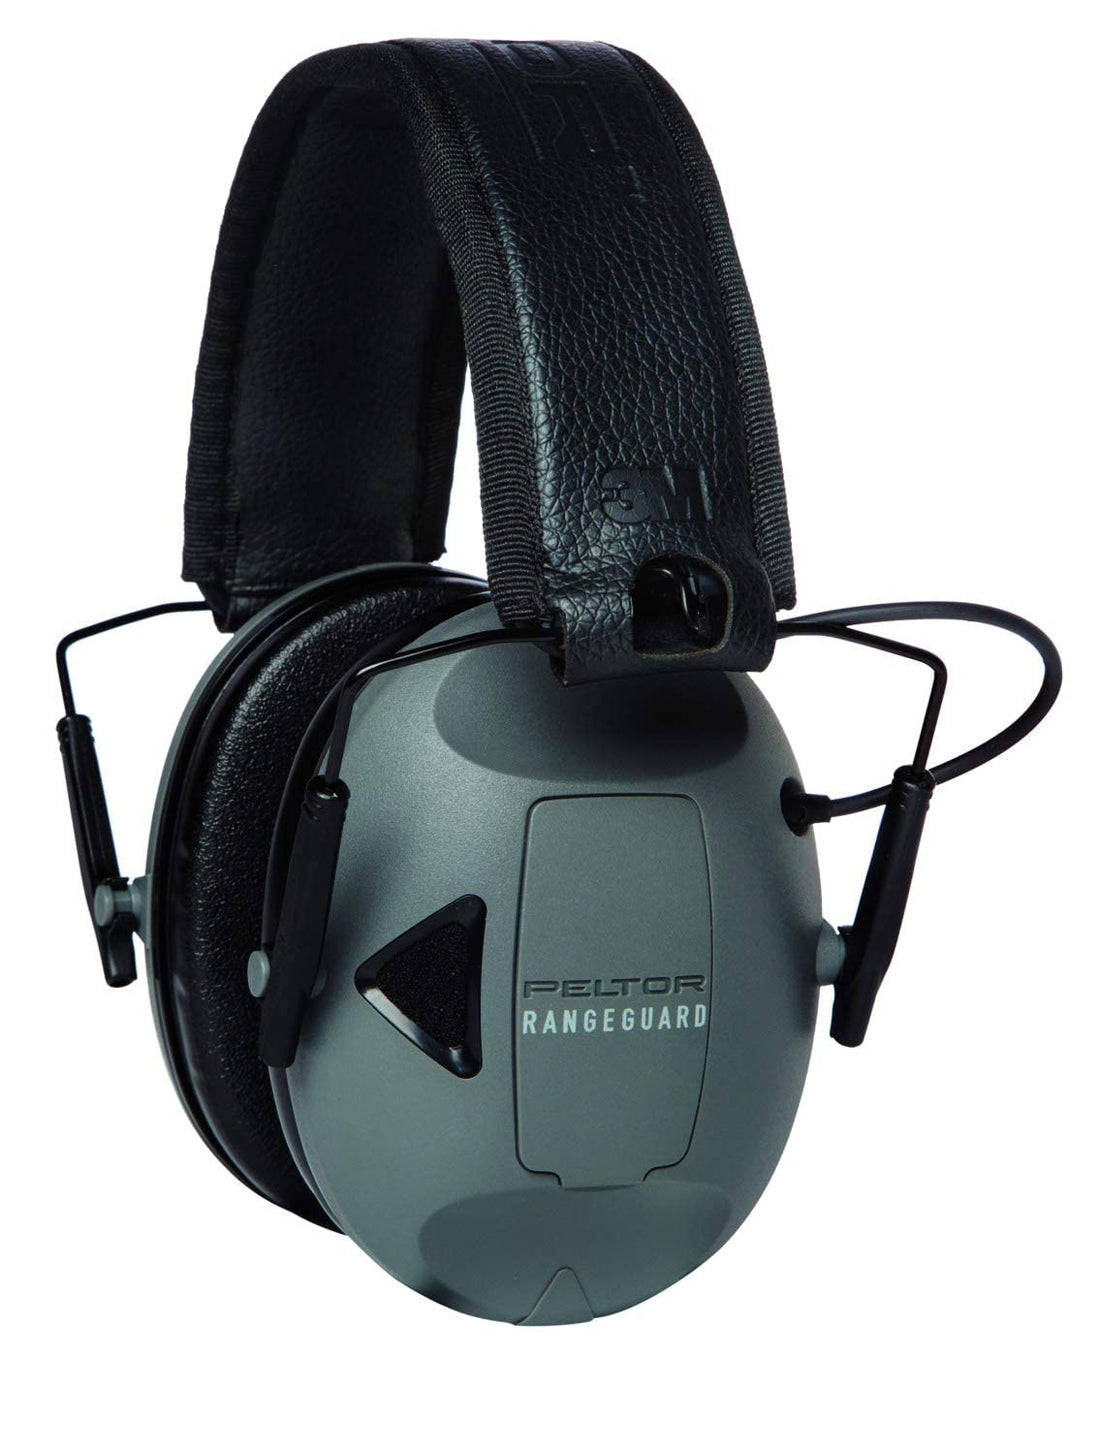 Peltor Sport RangeGuard RG-OTH-4 Electronic Hearing Protector, Ear Protection, NRR 21 dB, Ideal for Shooting and Hunting